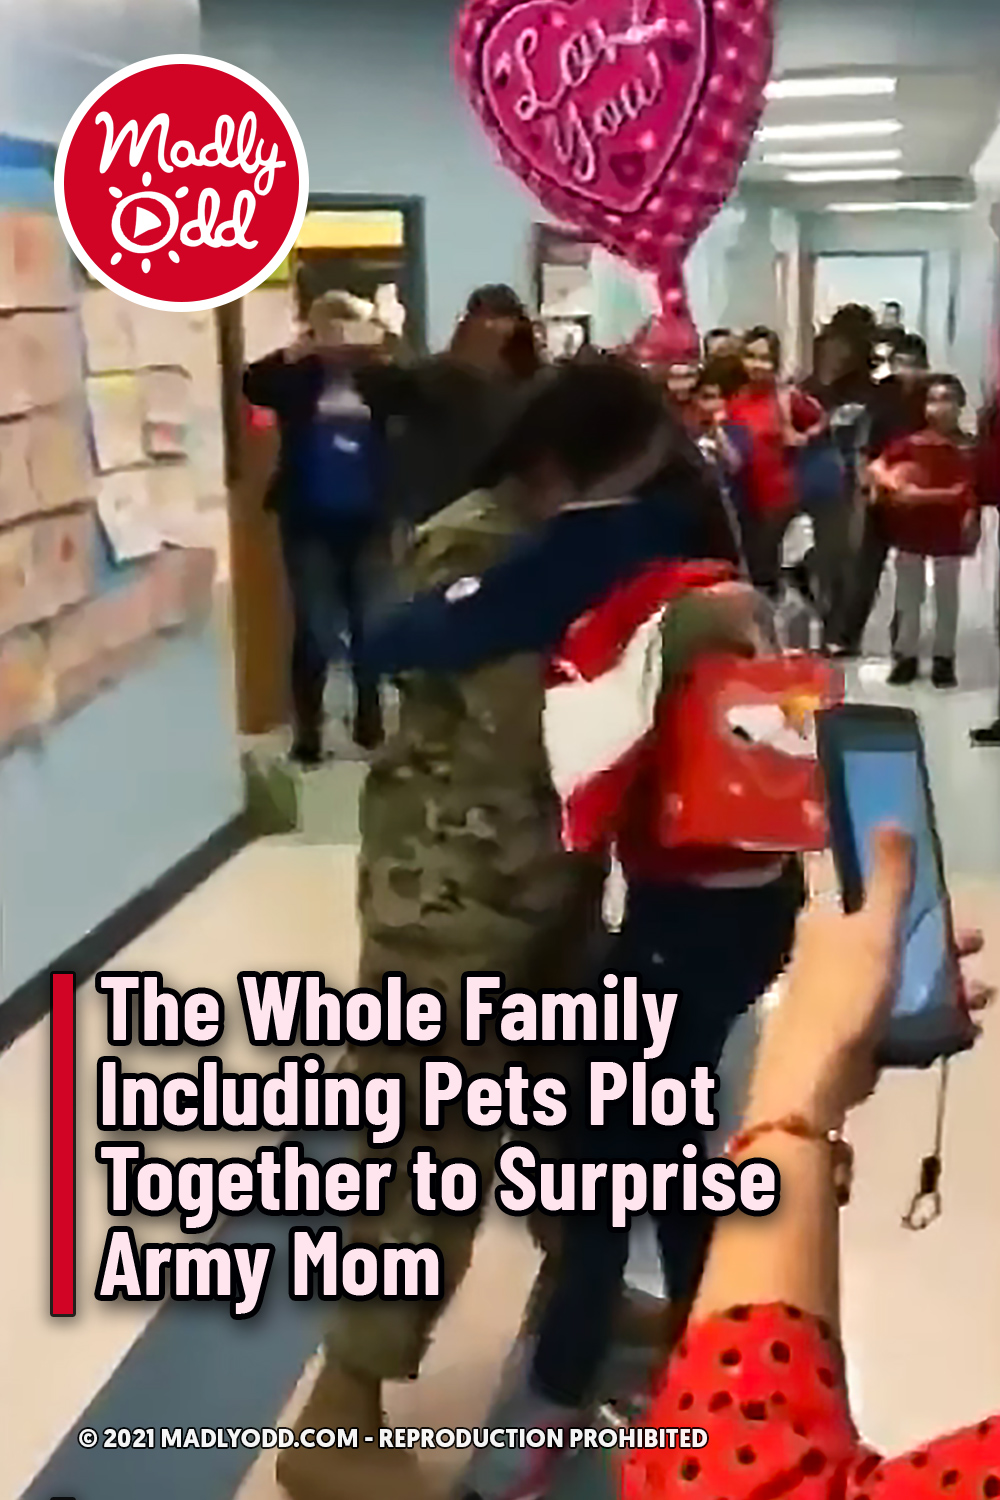 The Whole Family Including Pets Plot Together to Surprise Army Mom